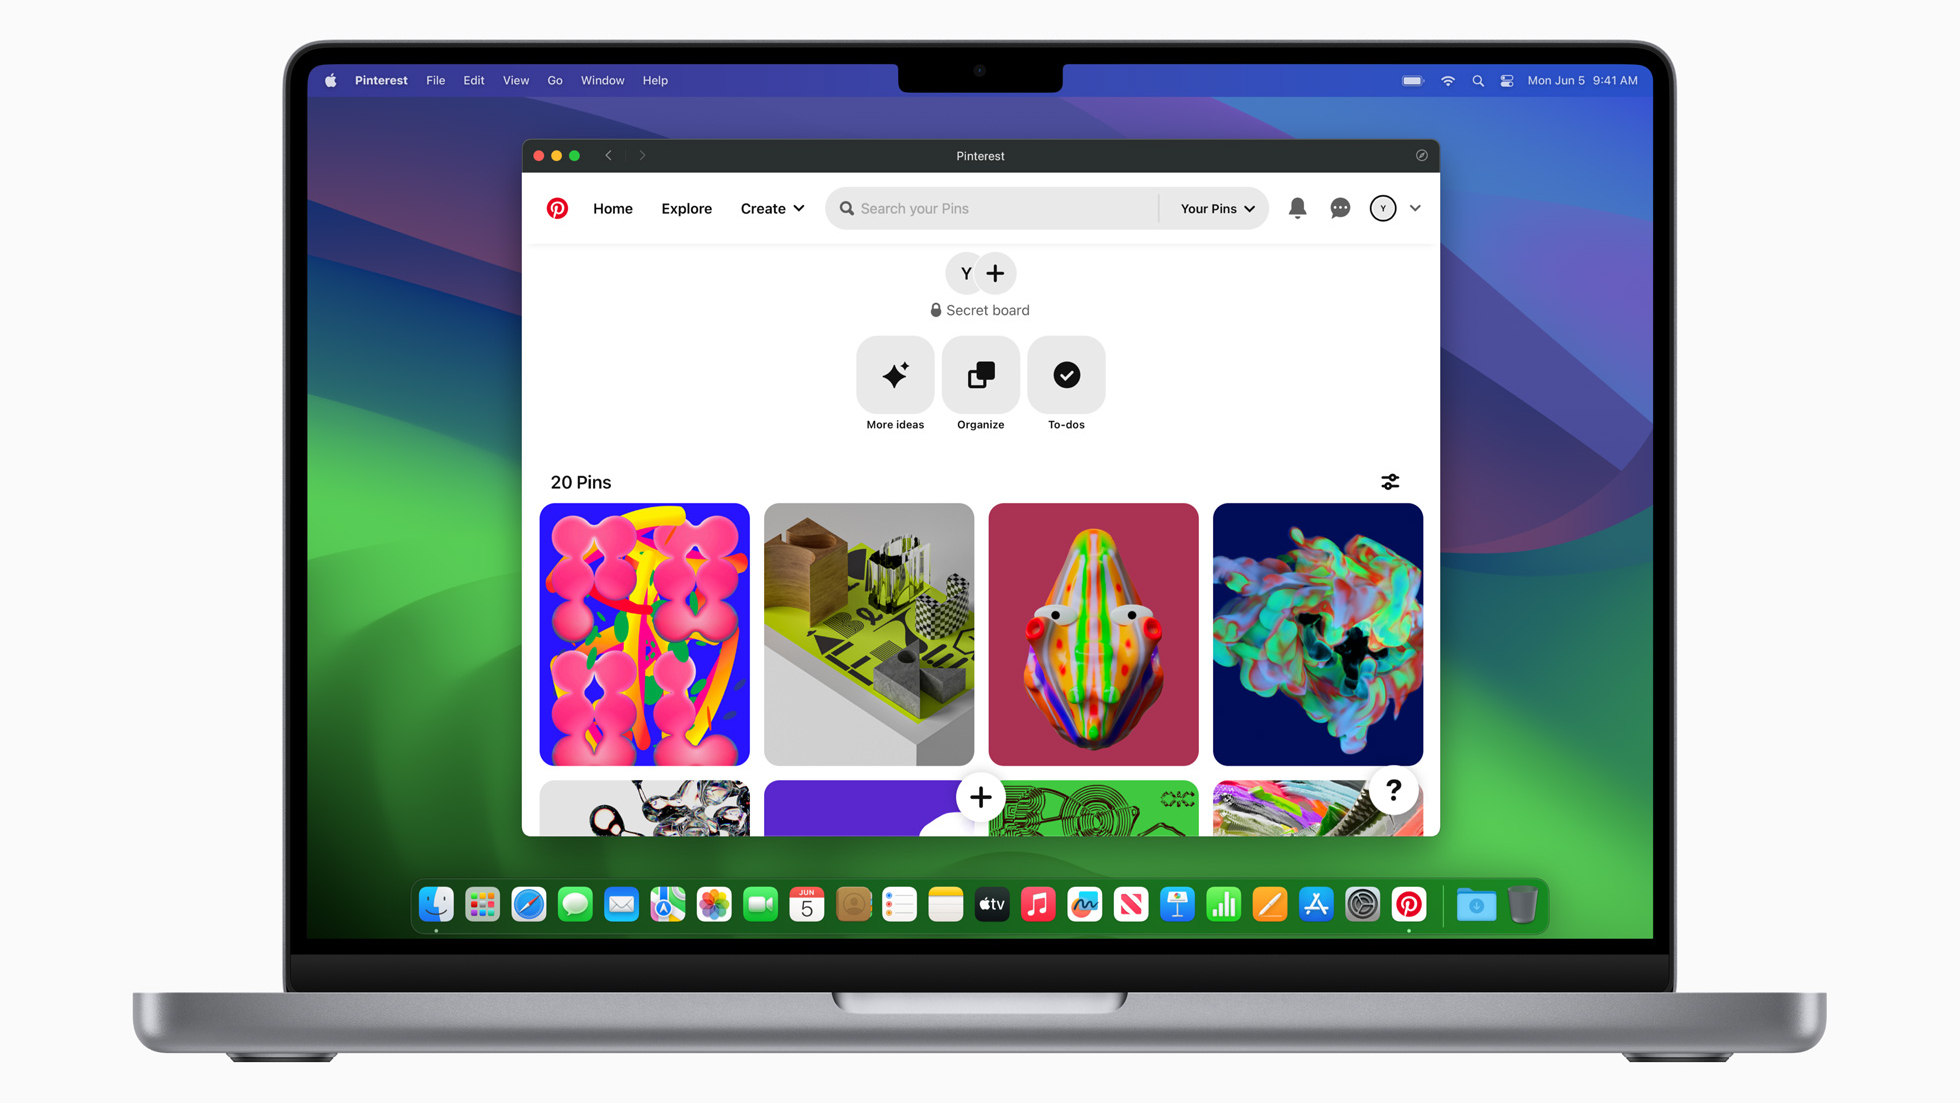 Every website can now be an app thanks to Safari — it's macOS Sonoma's secret weapon